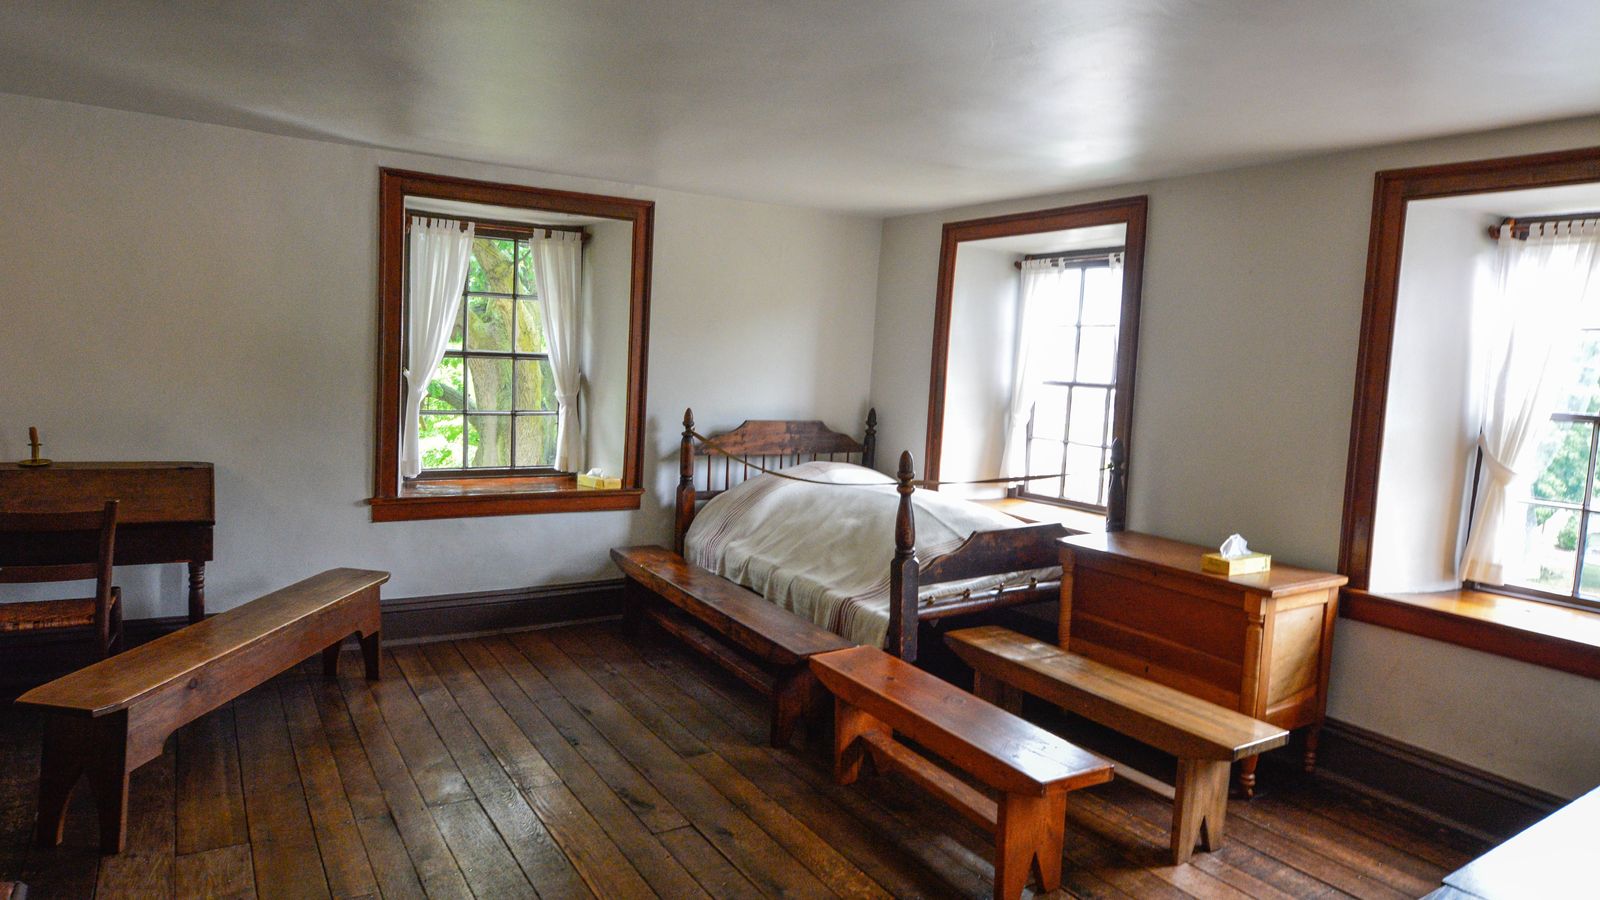 A bed sits in a room with three large windows where Joseph and Hyrum Smith were martyred.